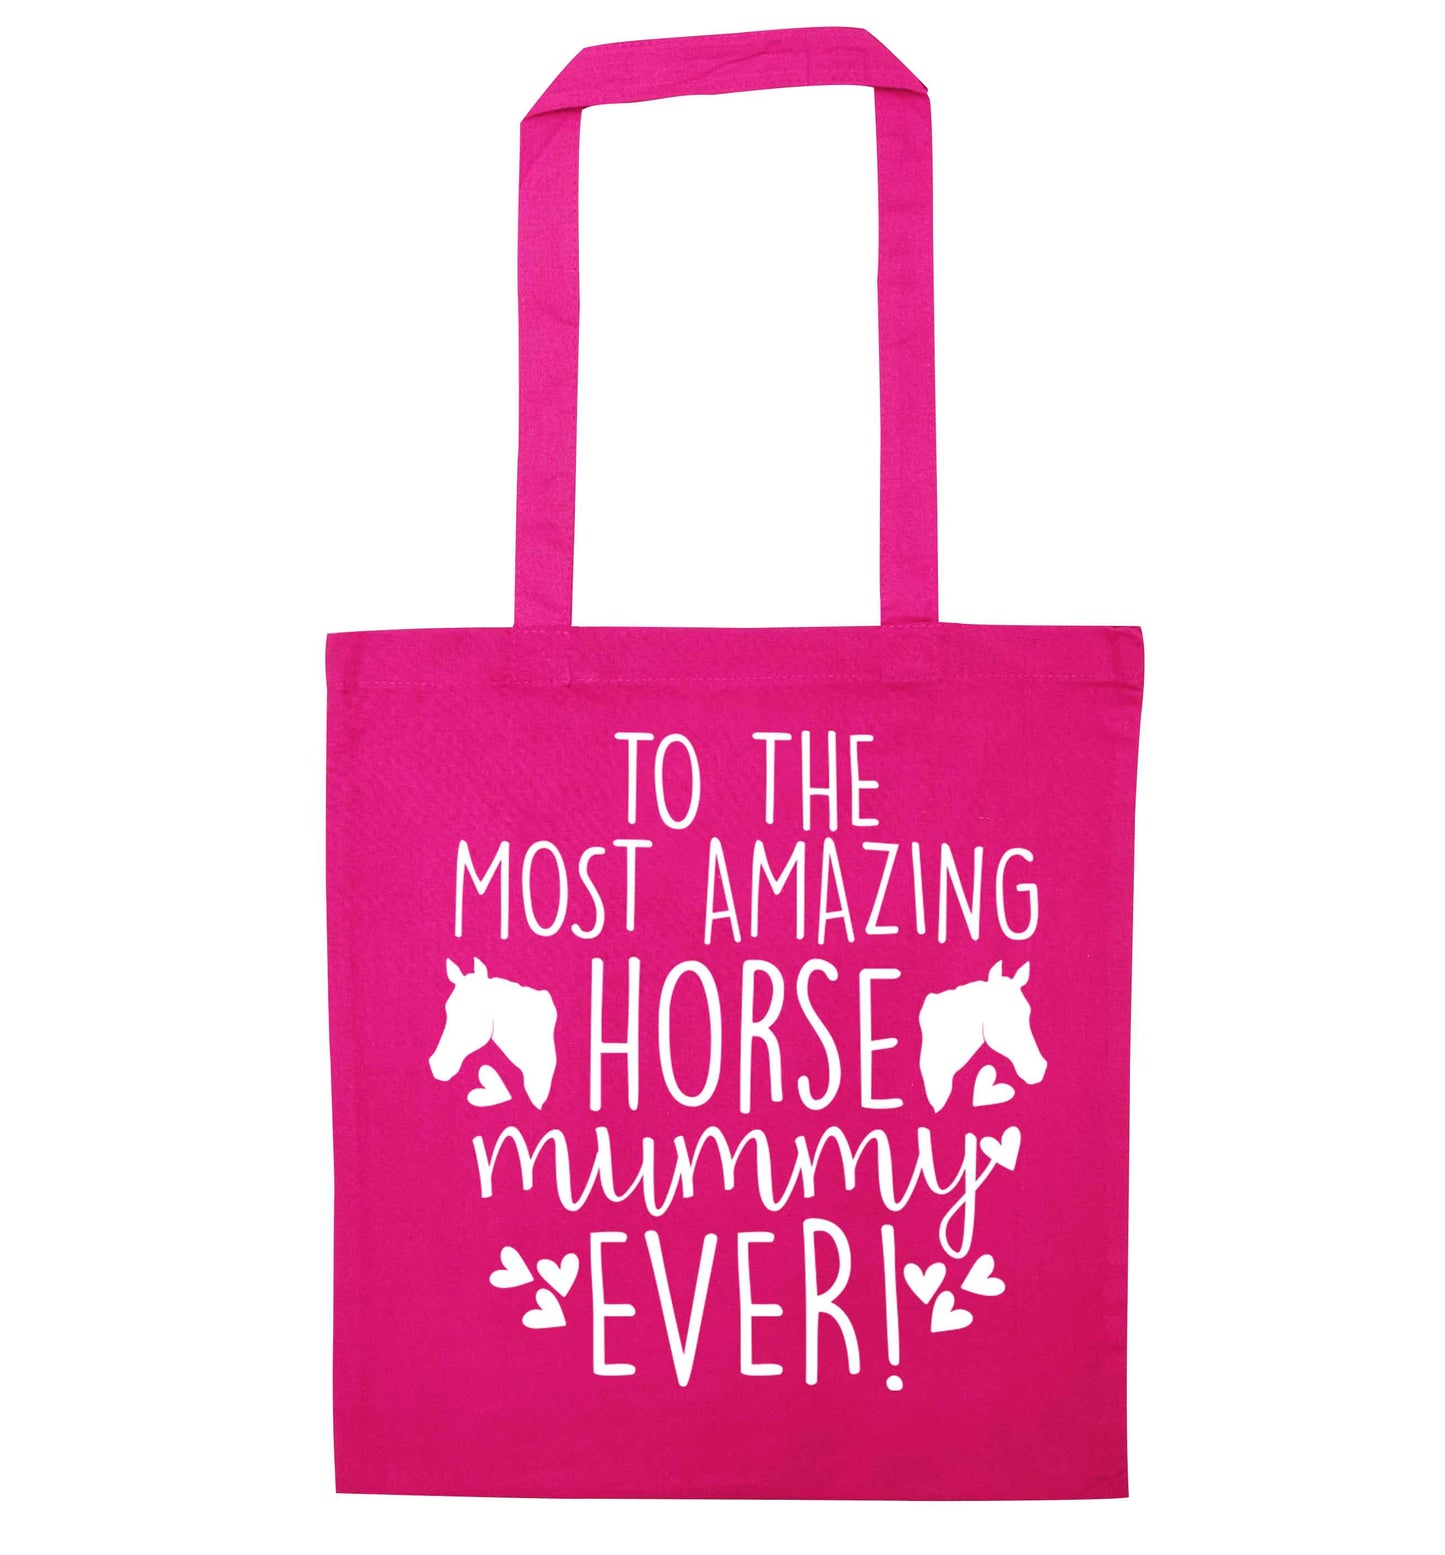 To the most amazing horse mummy ever! pink tote bag